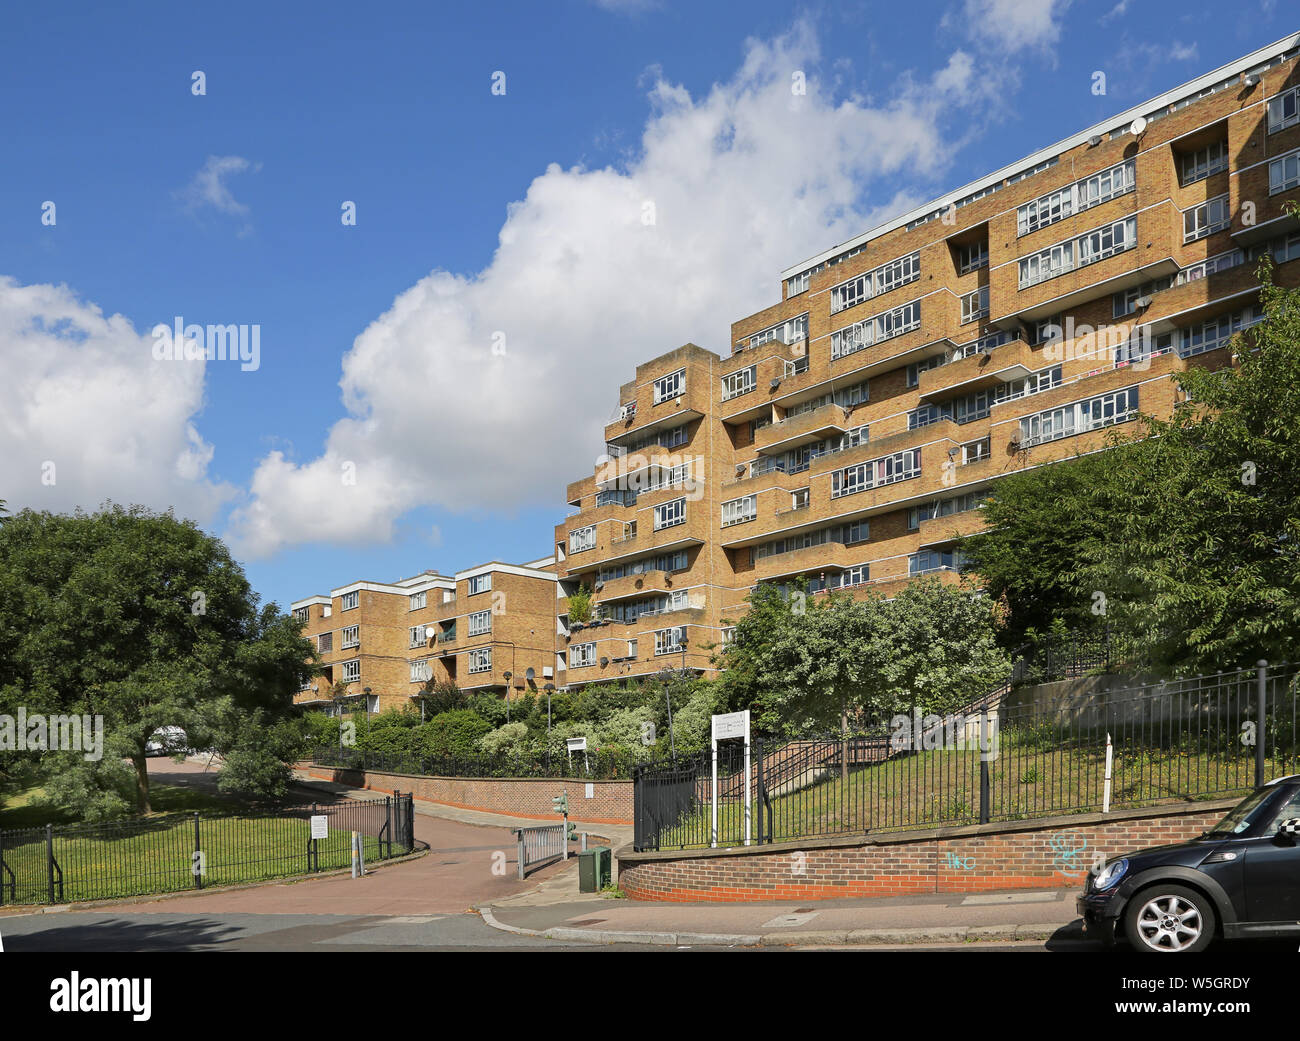 Dawson Heights, the famous 1960s public housing project in South London, designed by Kate Macintosh. Northern block viewed from the south. Stock Photo